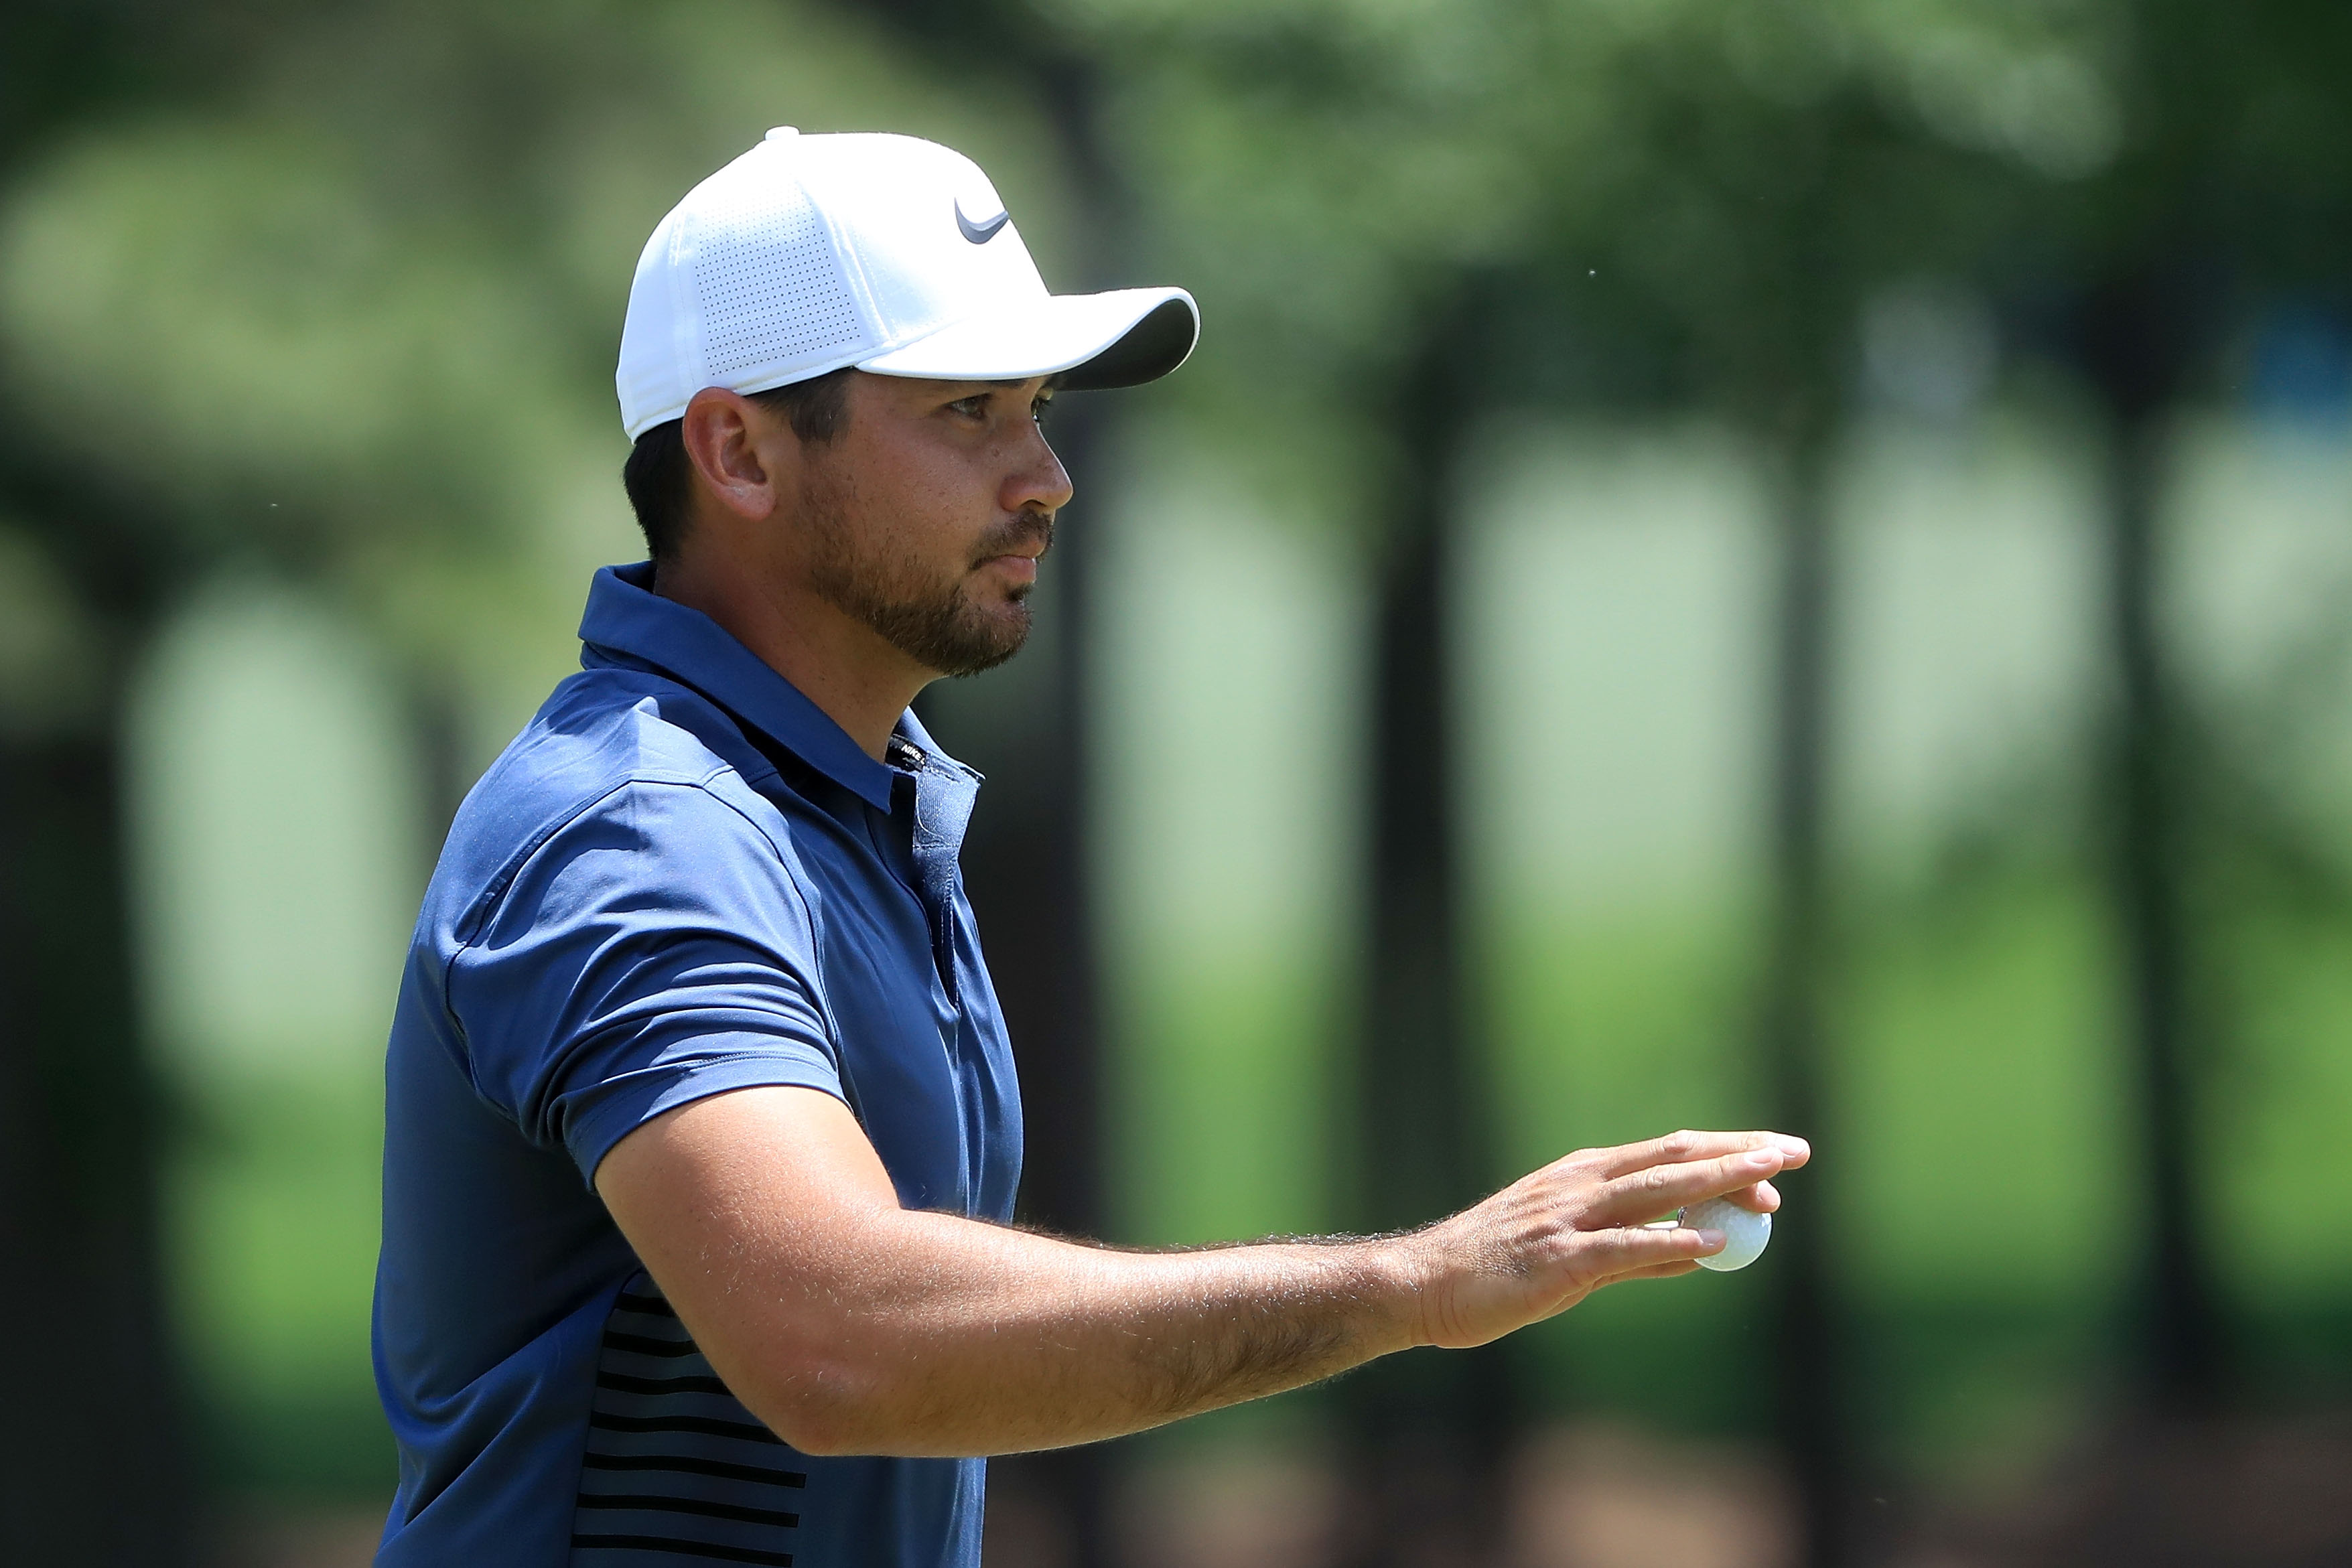 The clubs Jason Day used to win the Wells Fargo Championship